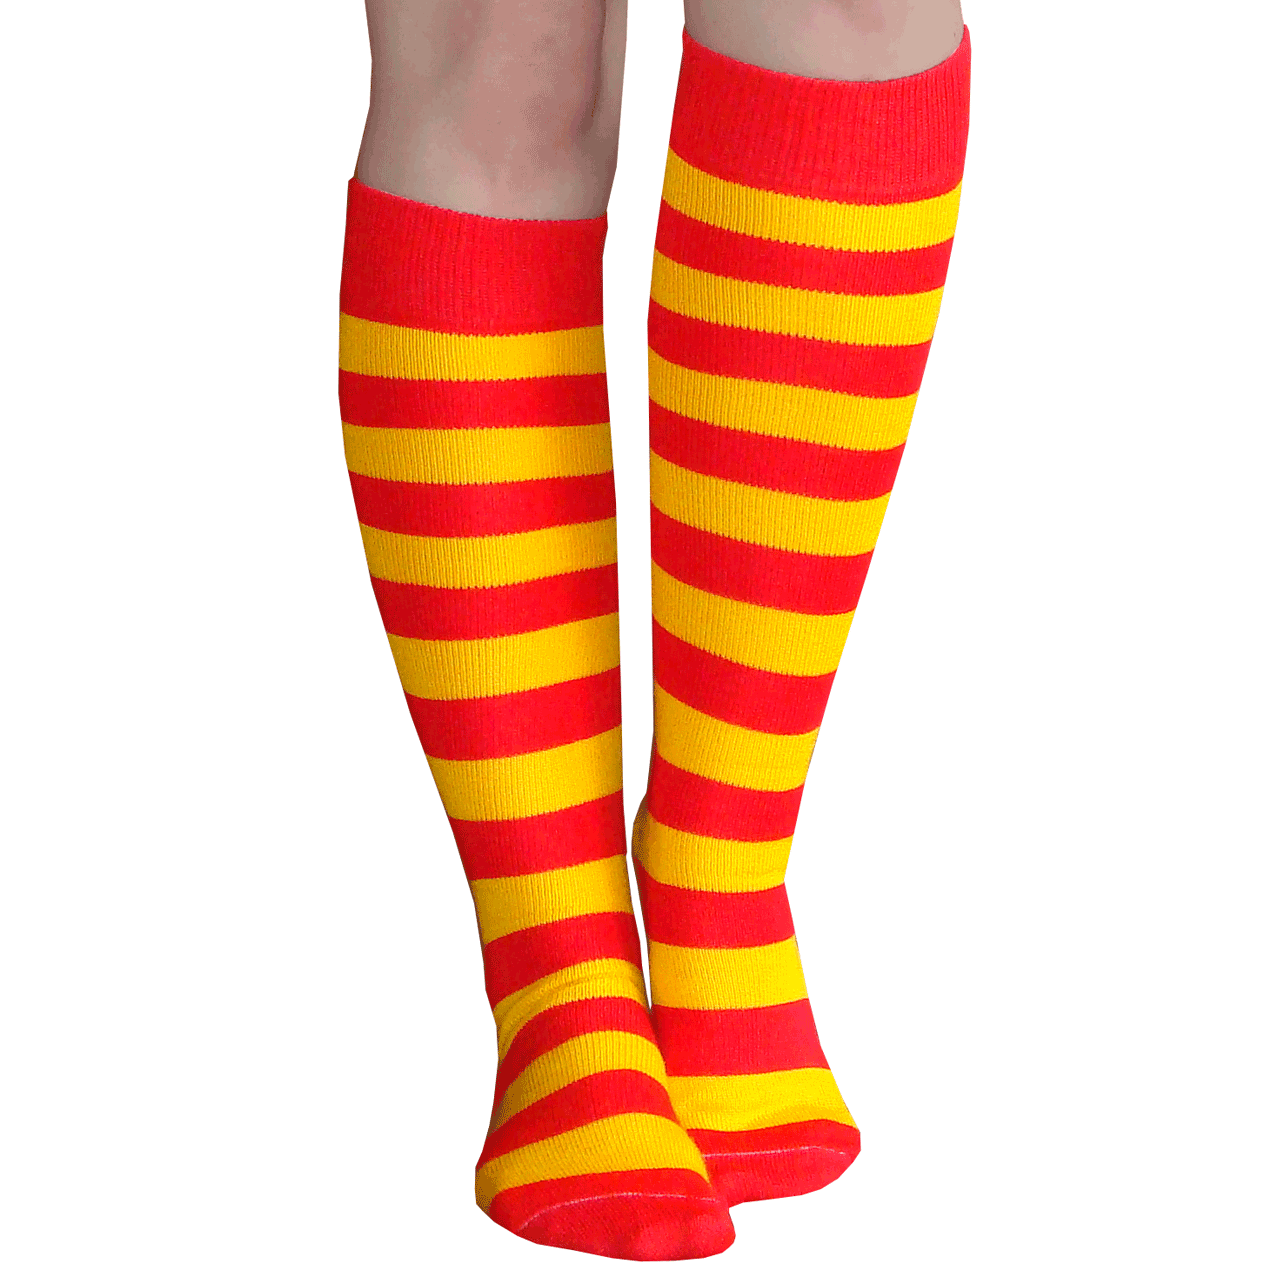 Organic Knee Socks: Tomato Red and Yellow Stripe – Biddle and Bop